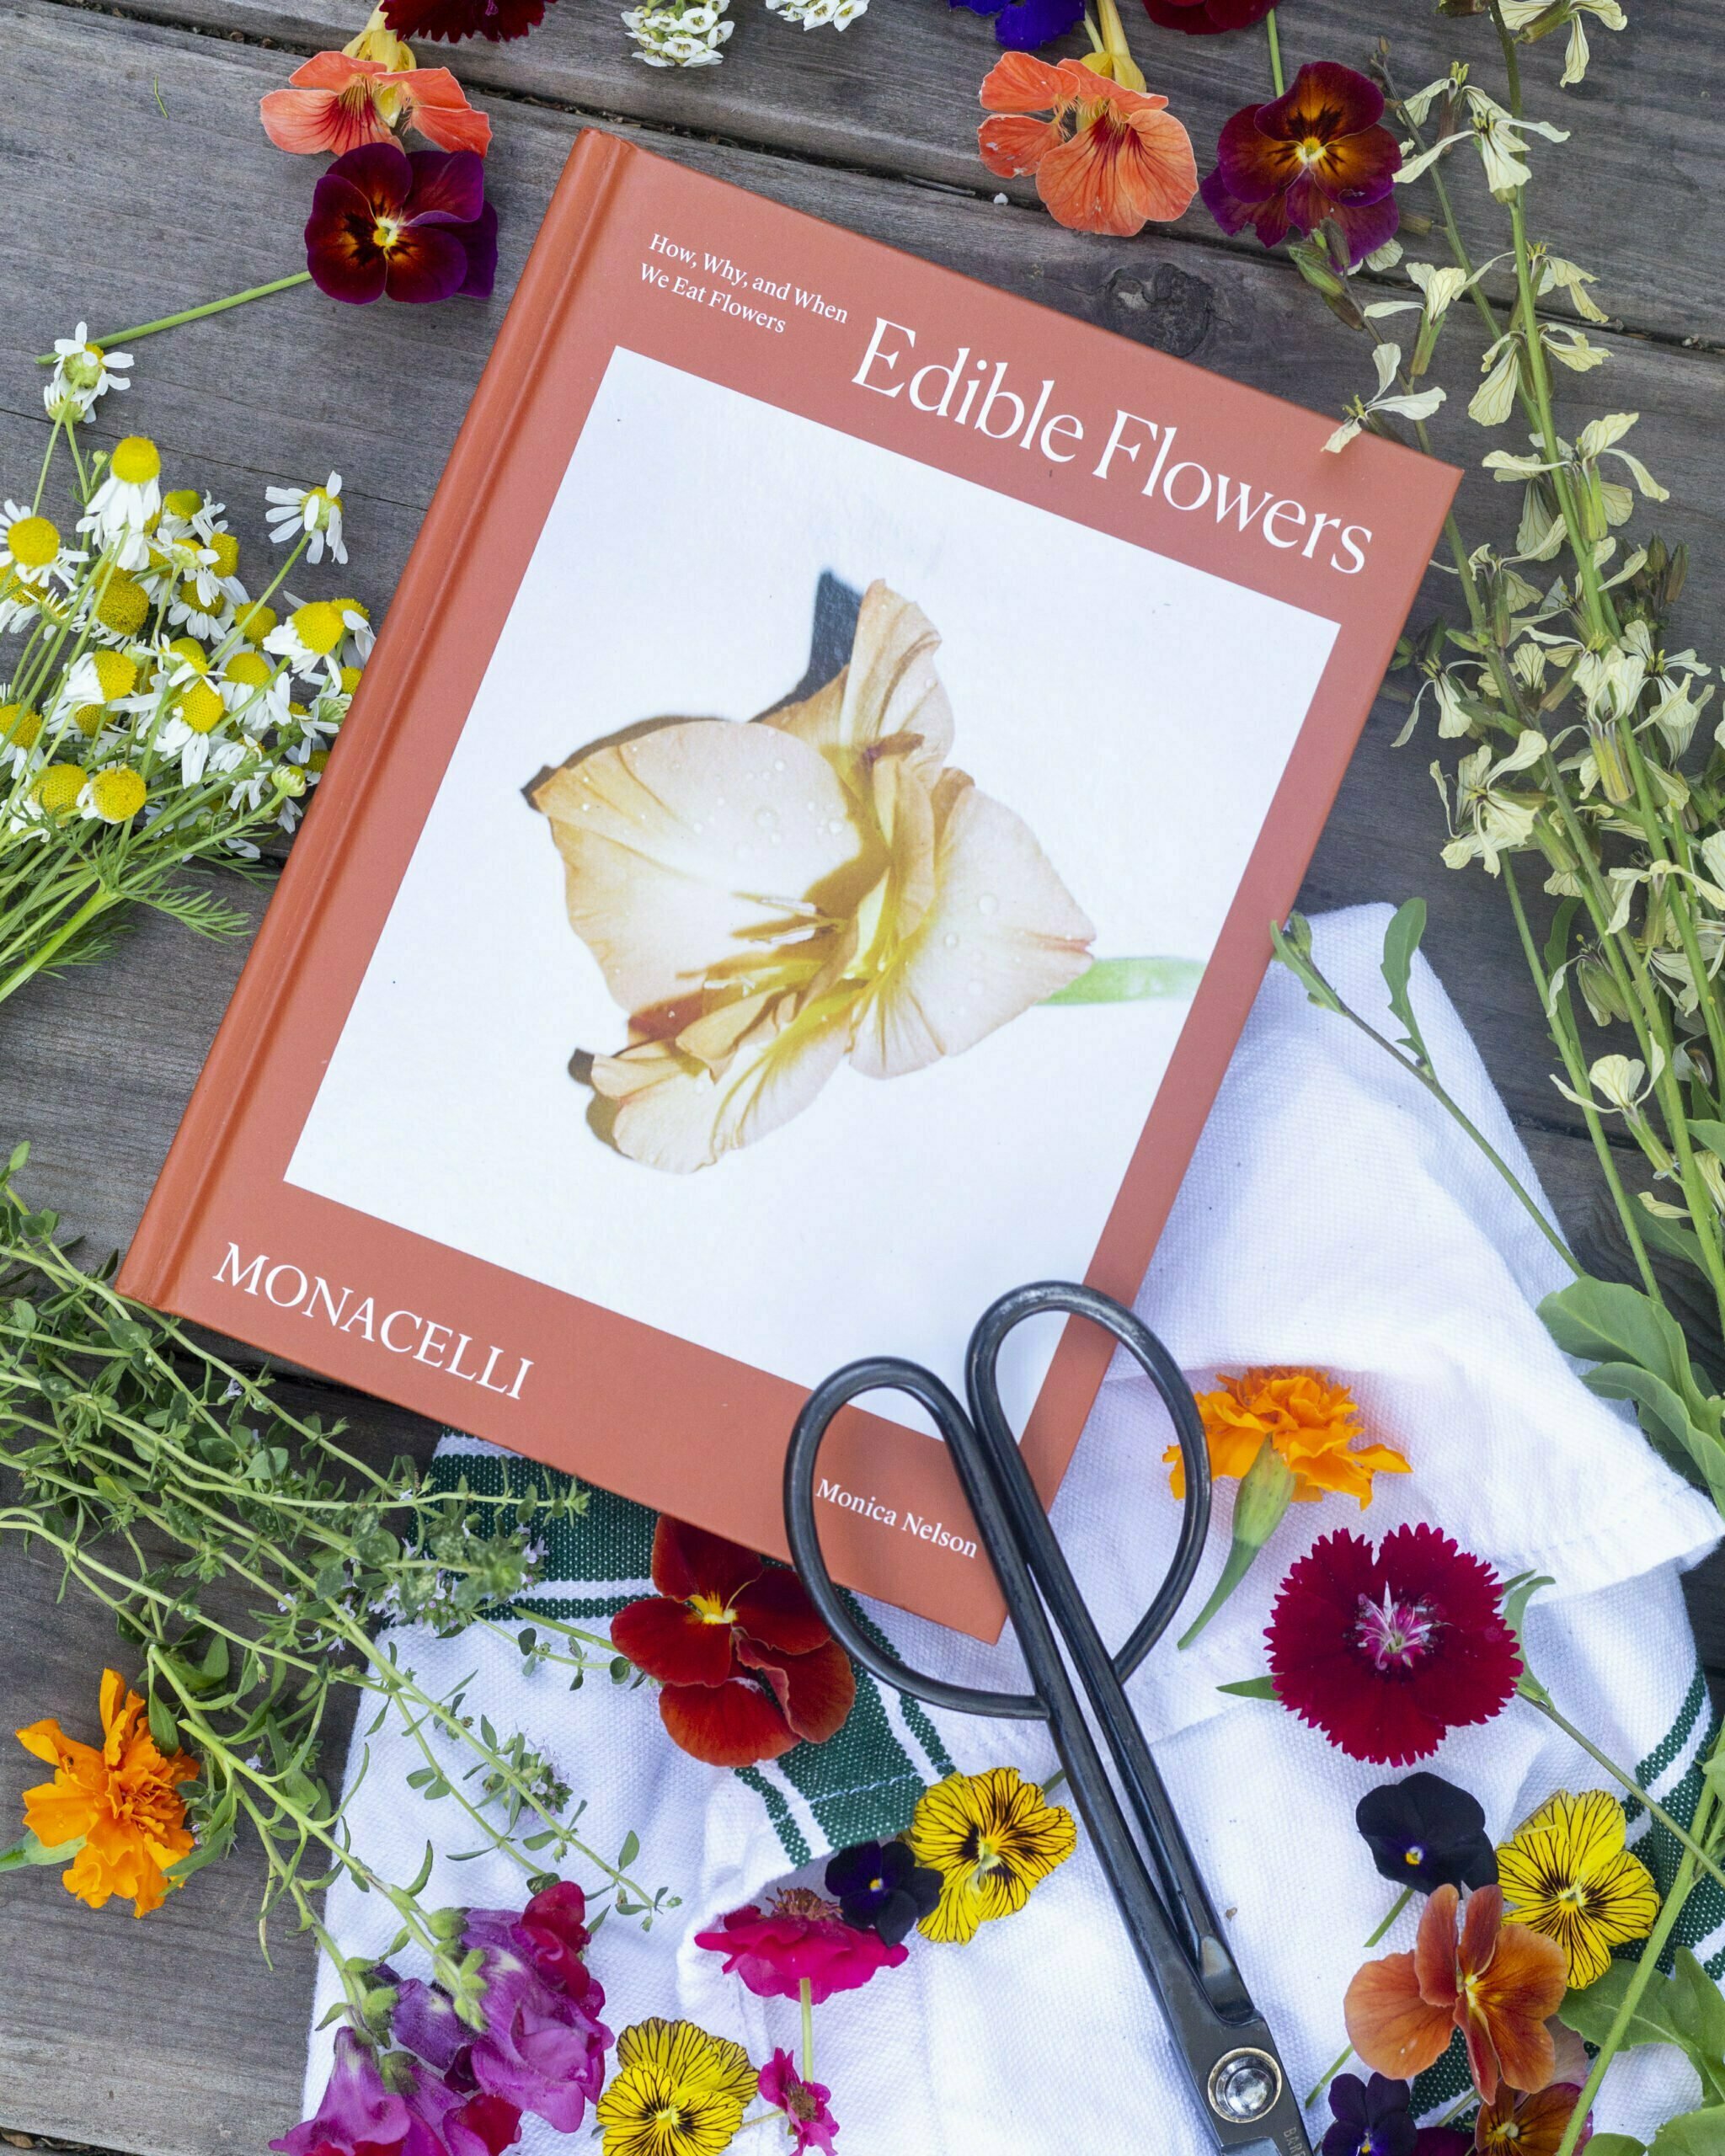 Five Garden Books for Chefs edible flowers